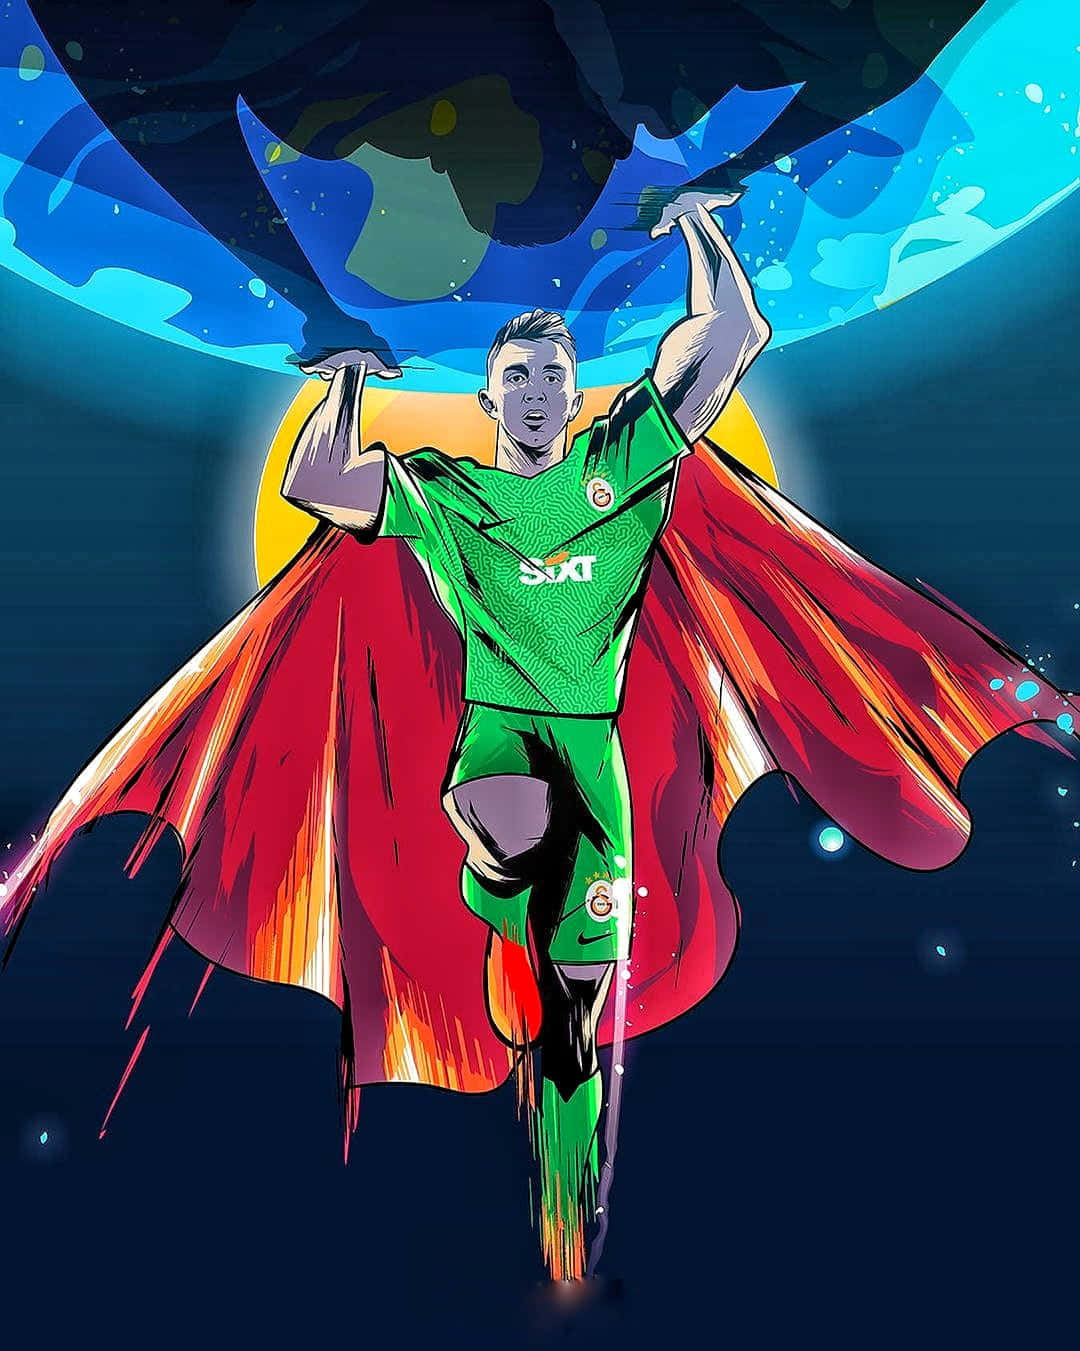 A Soccer Player With A Cape And Cape Flying Over The Earth